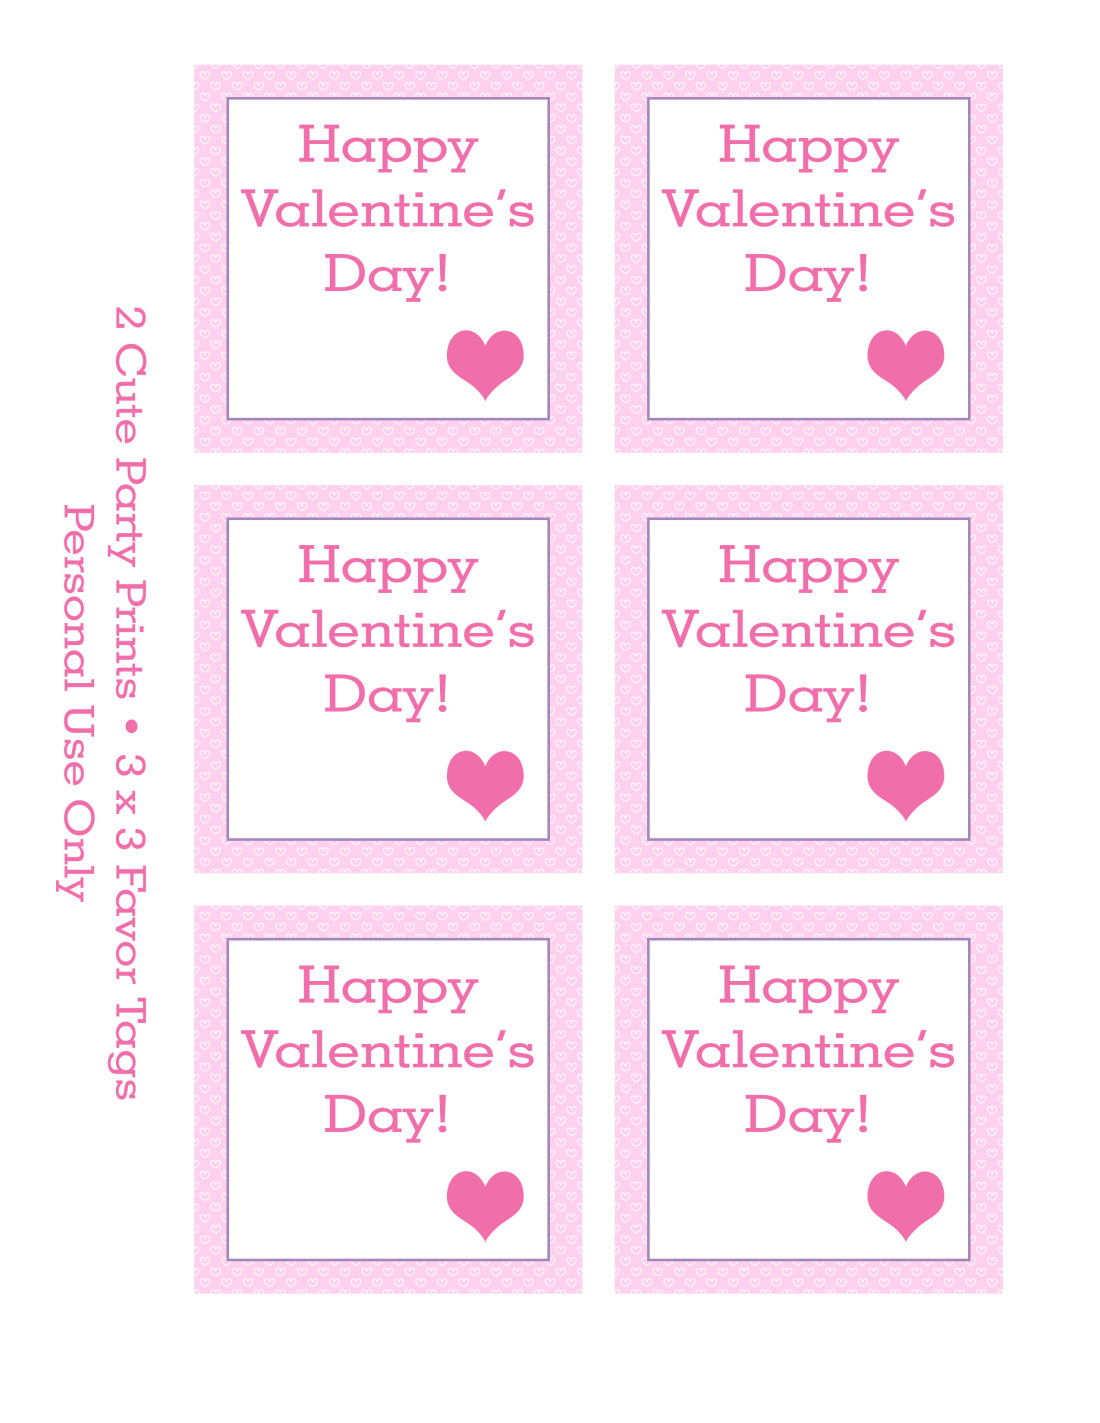 6-best-images-of-happy-valentine-s-day-printable-tag-valentine-s-day